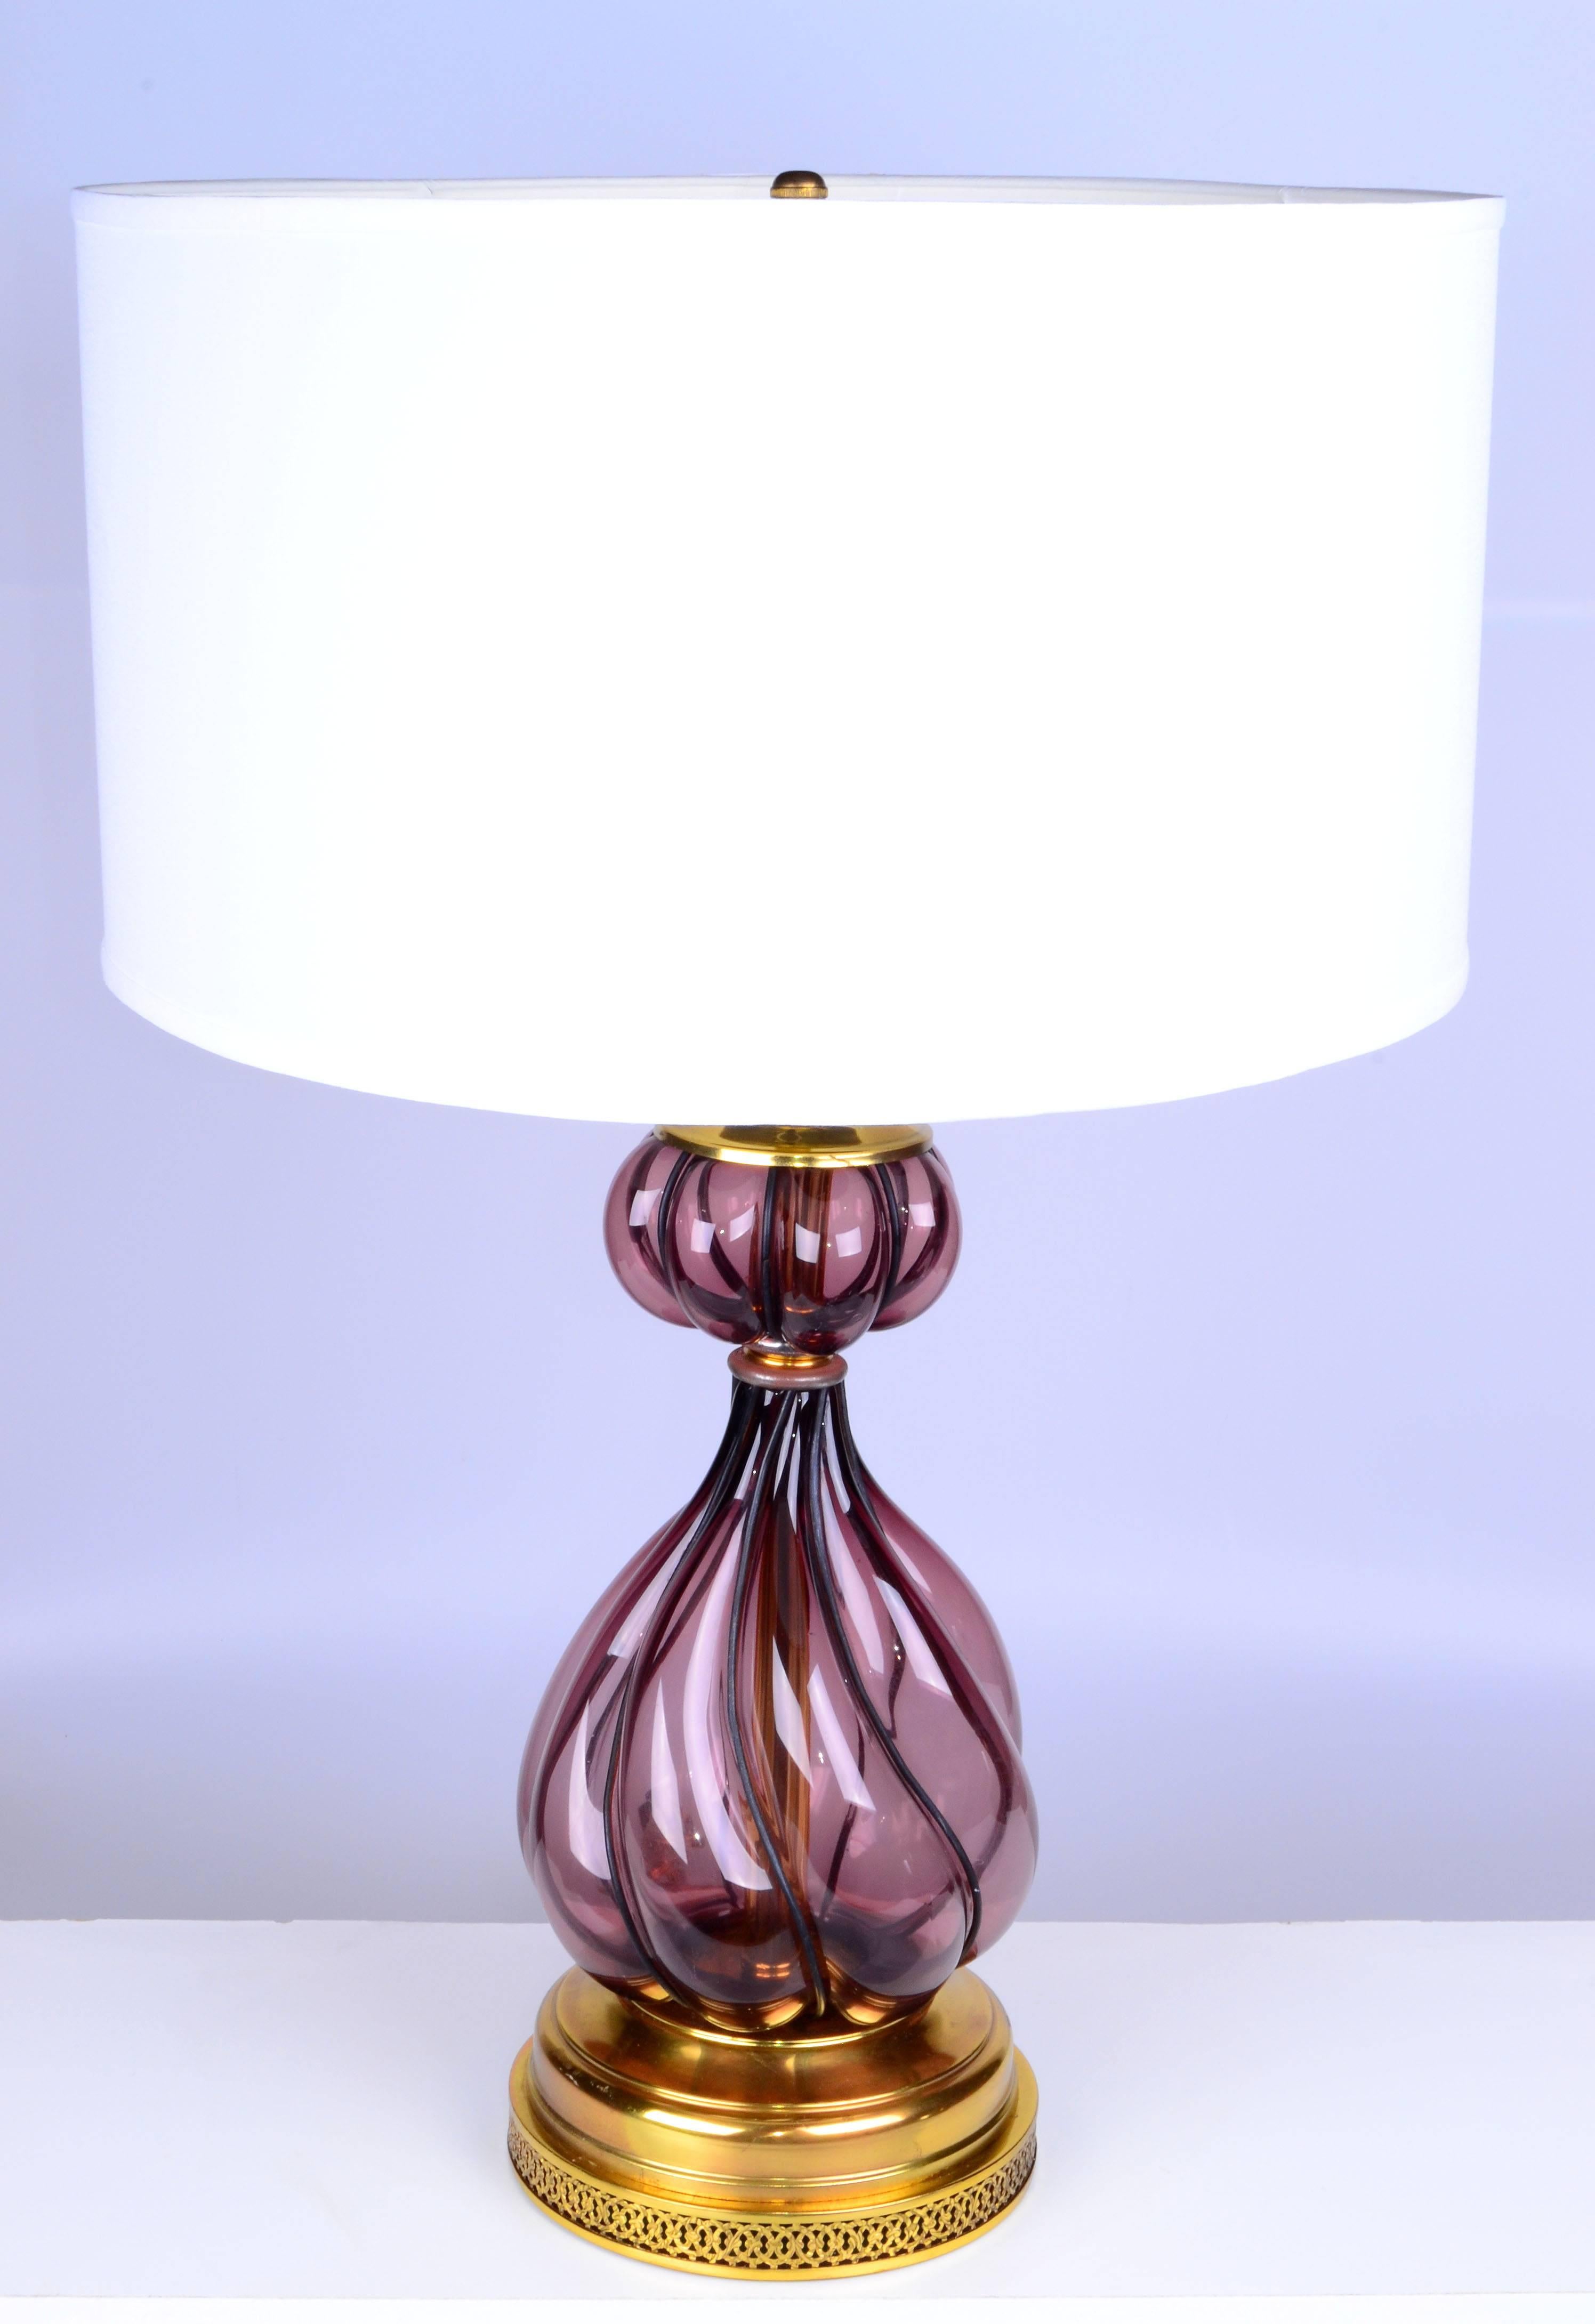 Offered is an Italian blown purple art glass table lamp in a metal frame.
Wired for the U.S. and in working condition takes a regular or LED light bulb.
Harp, finial, and shade not included. No maker's mark.